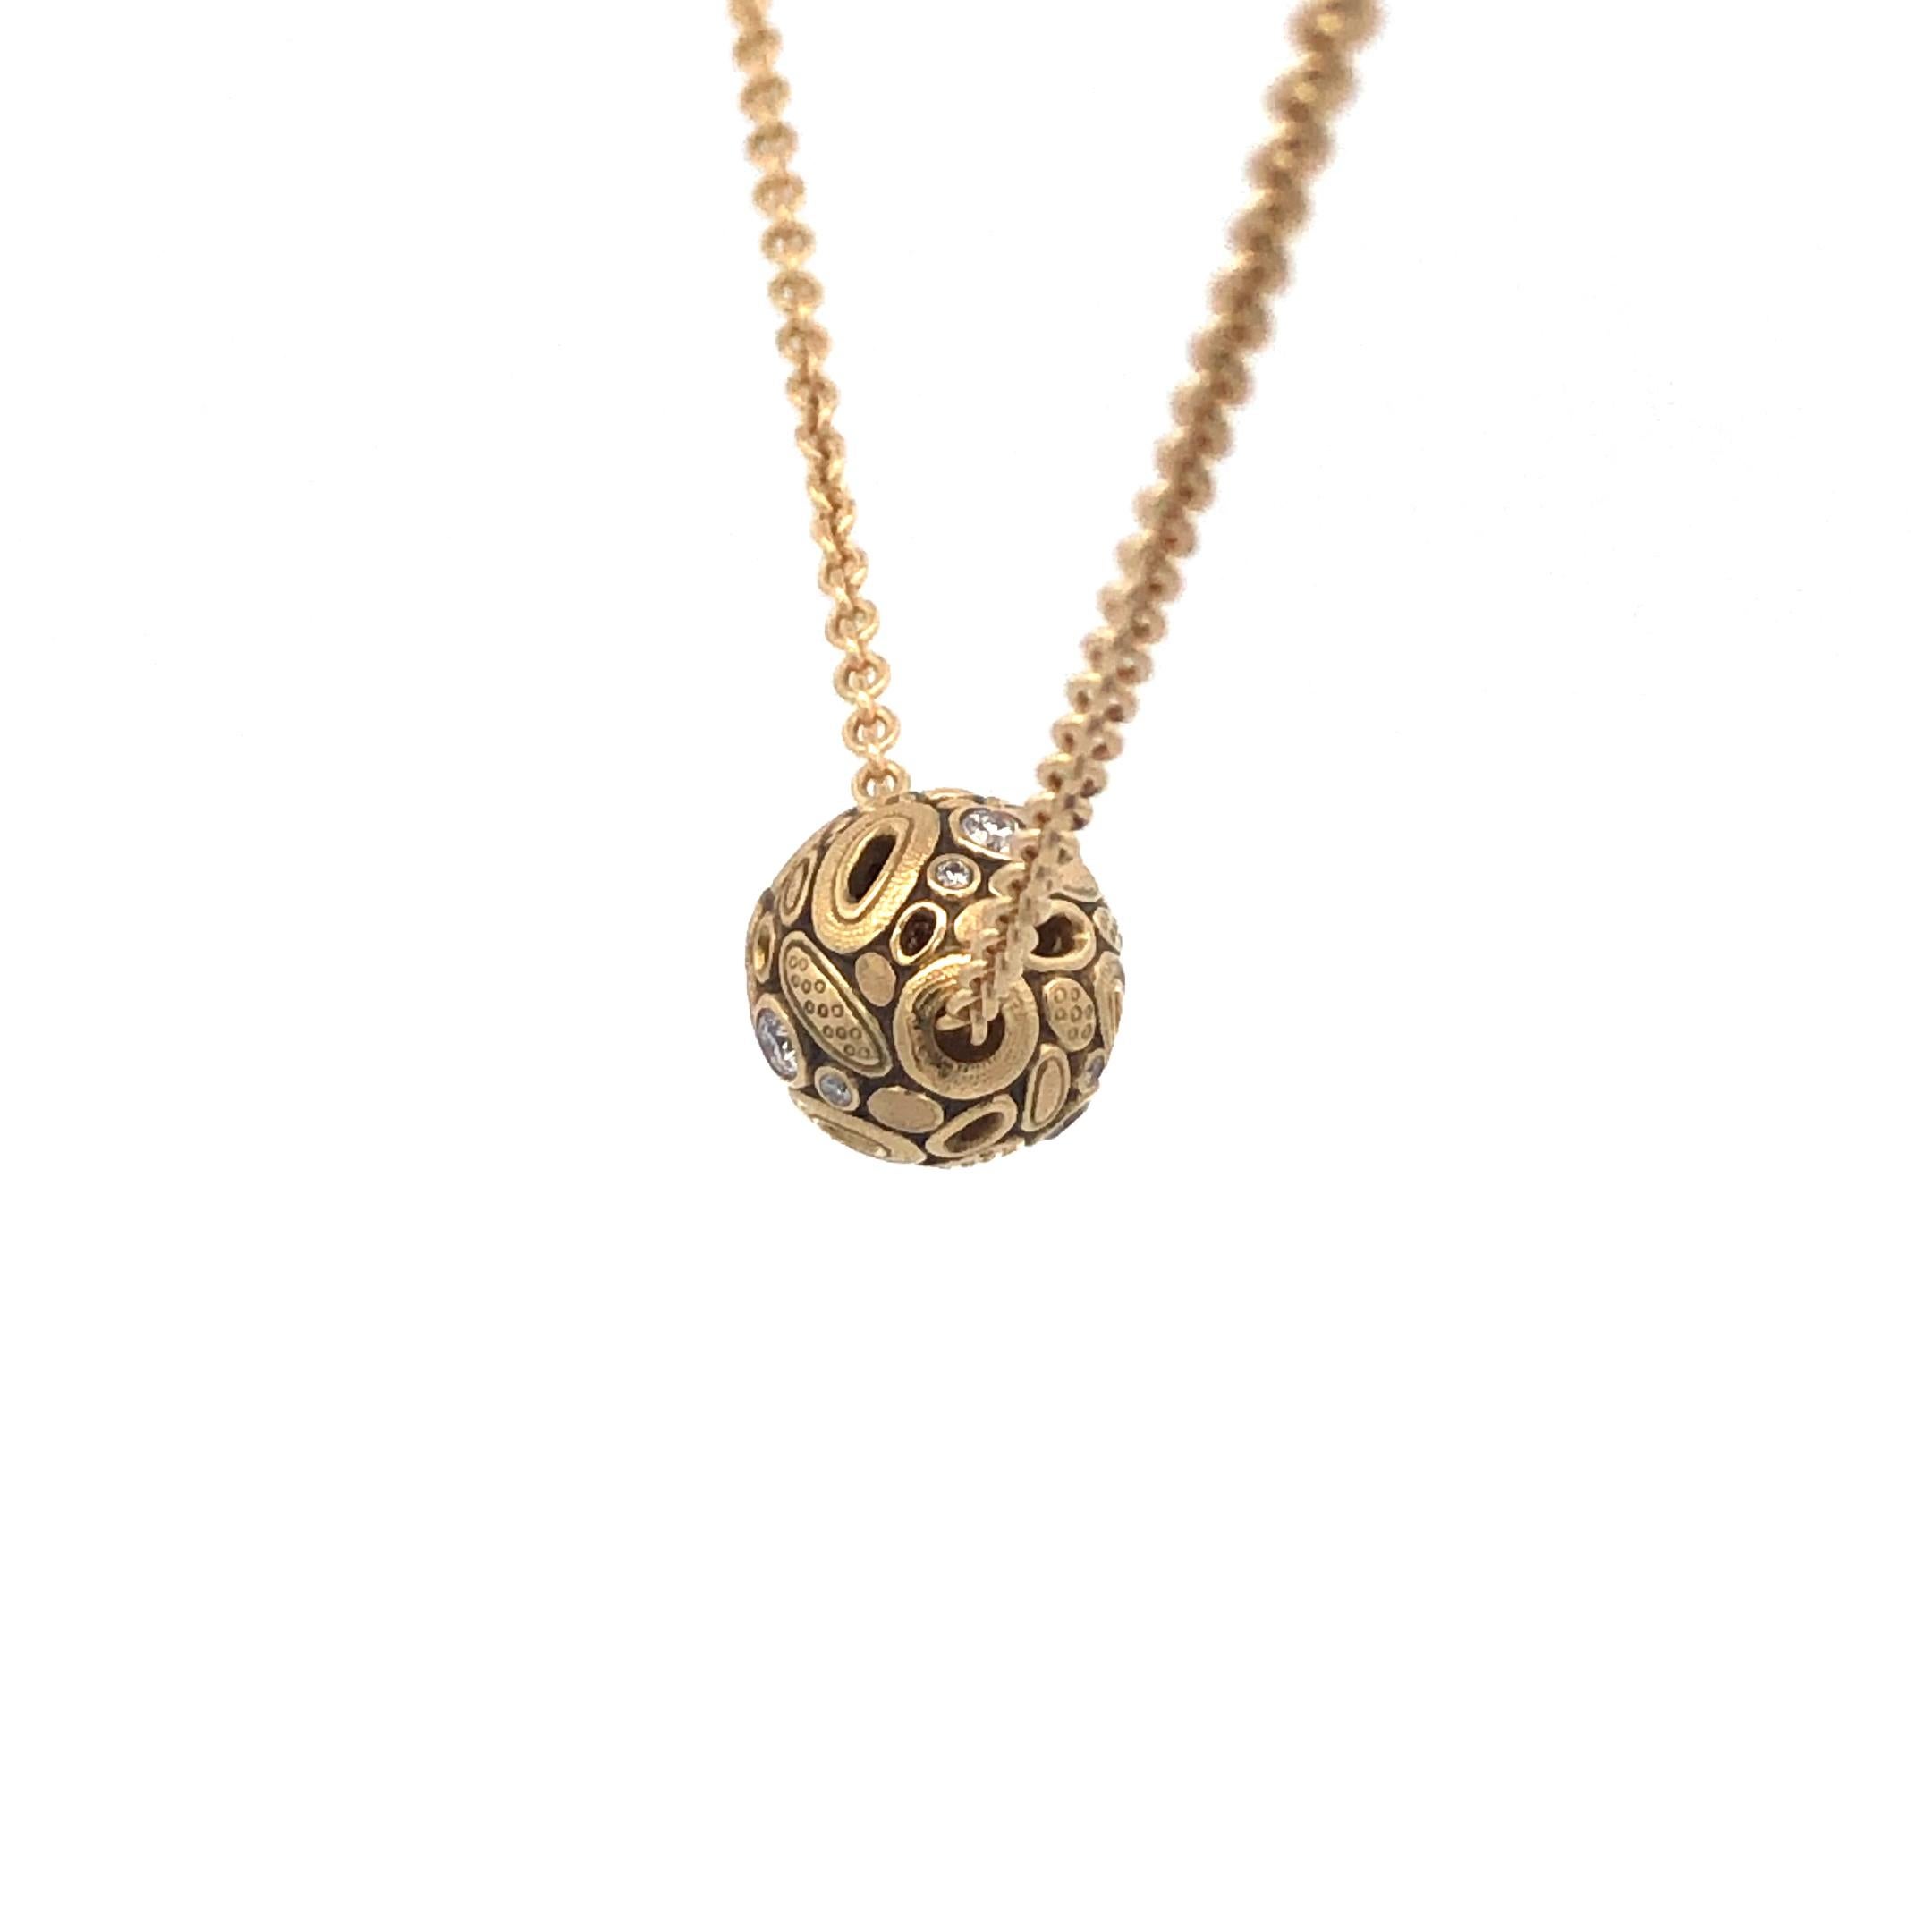 Alex Spkus 'Open Ovals' Ball Pendant with Diamonds on 18'' Chain, 18K Yellow Gol In New Condition For Sale In Dallas, TX